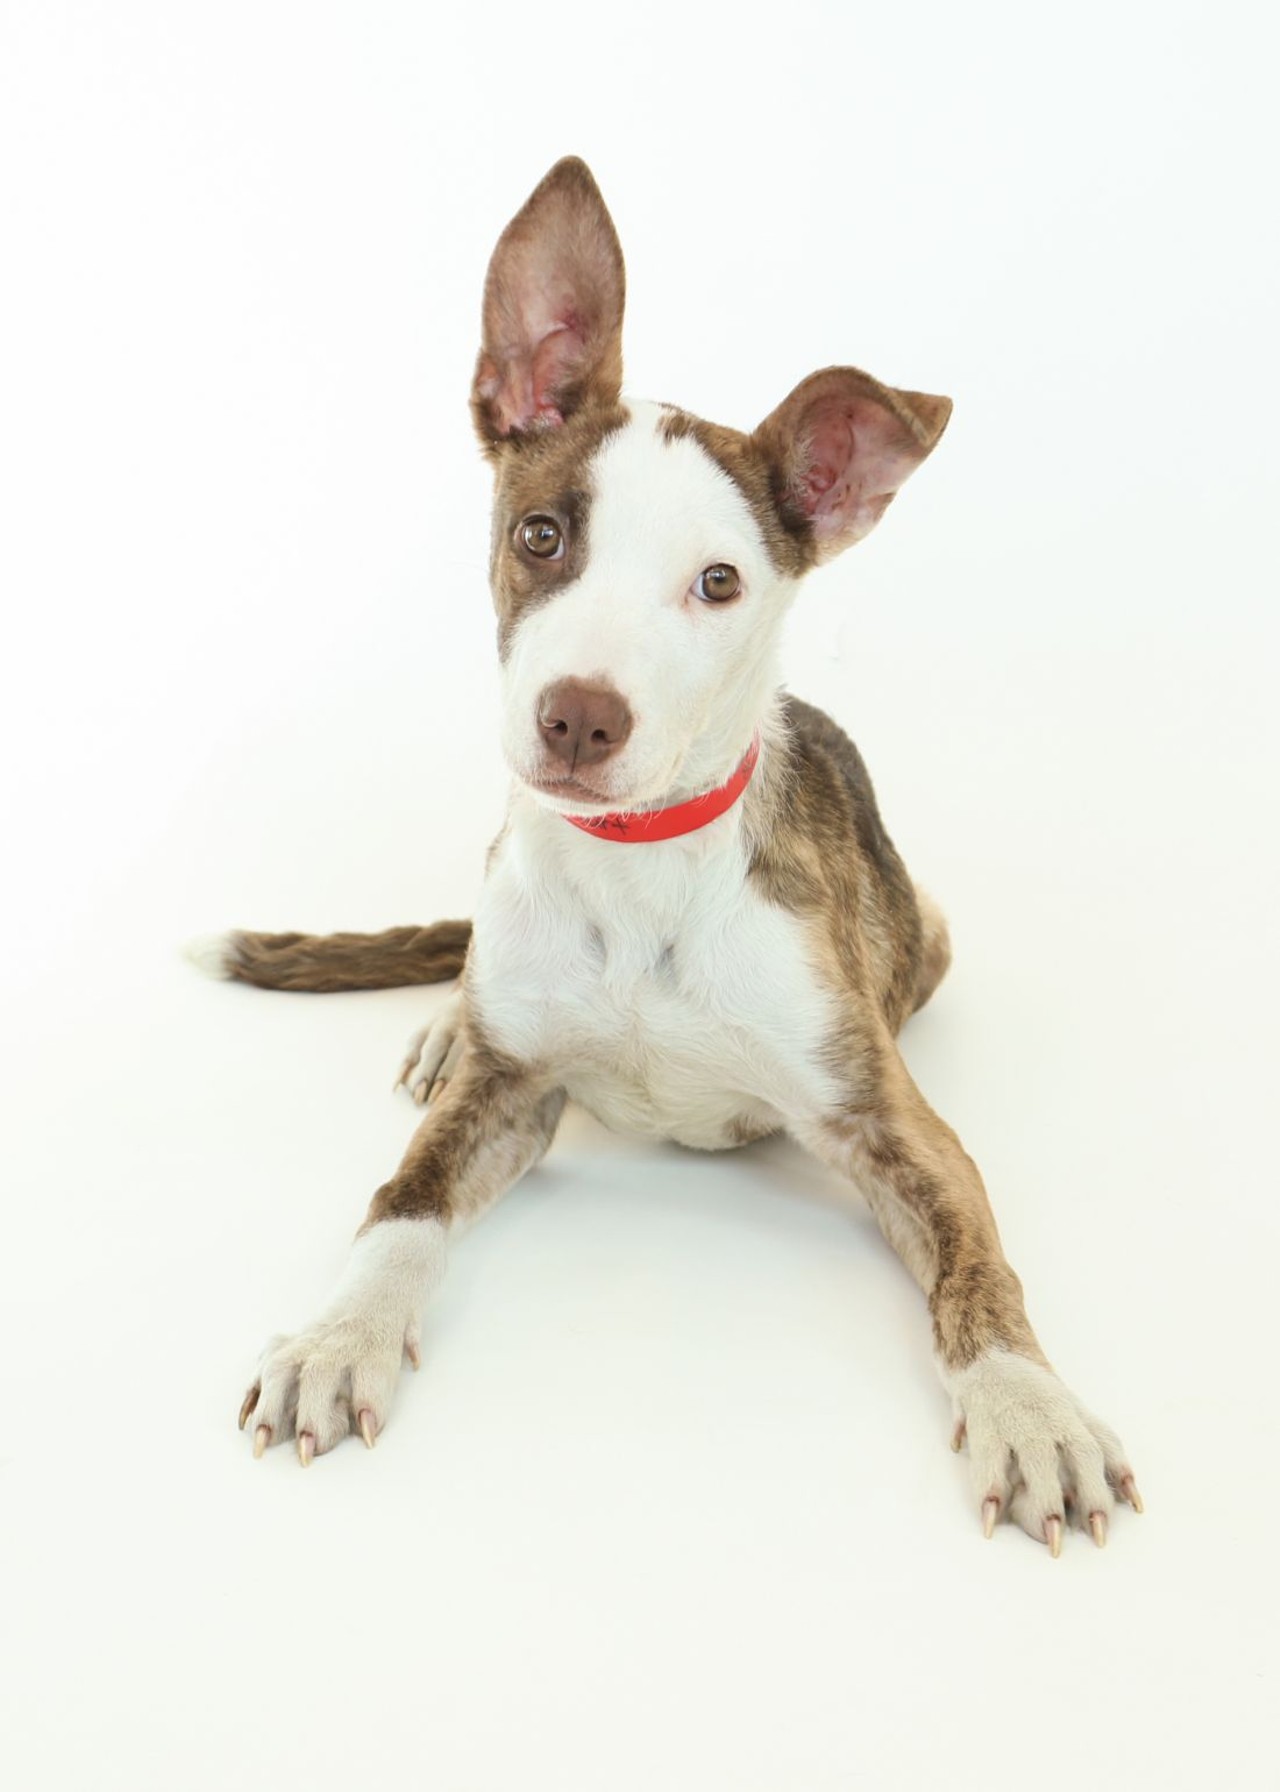 NAME: Pop Tart
GENDER: Female
BREED: Pit Bull Terrier
AGE: 4 months
WEIGHT: 16 pounds
SPECIAL CONSIDERATIONS: None
REASON I CAME TO MHS: Homeless in Detroit
LOCATION: Mackey Center for Animal Care in Detroit
ID NUMBER: 865480